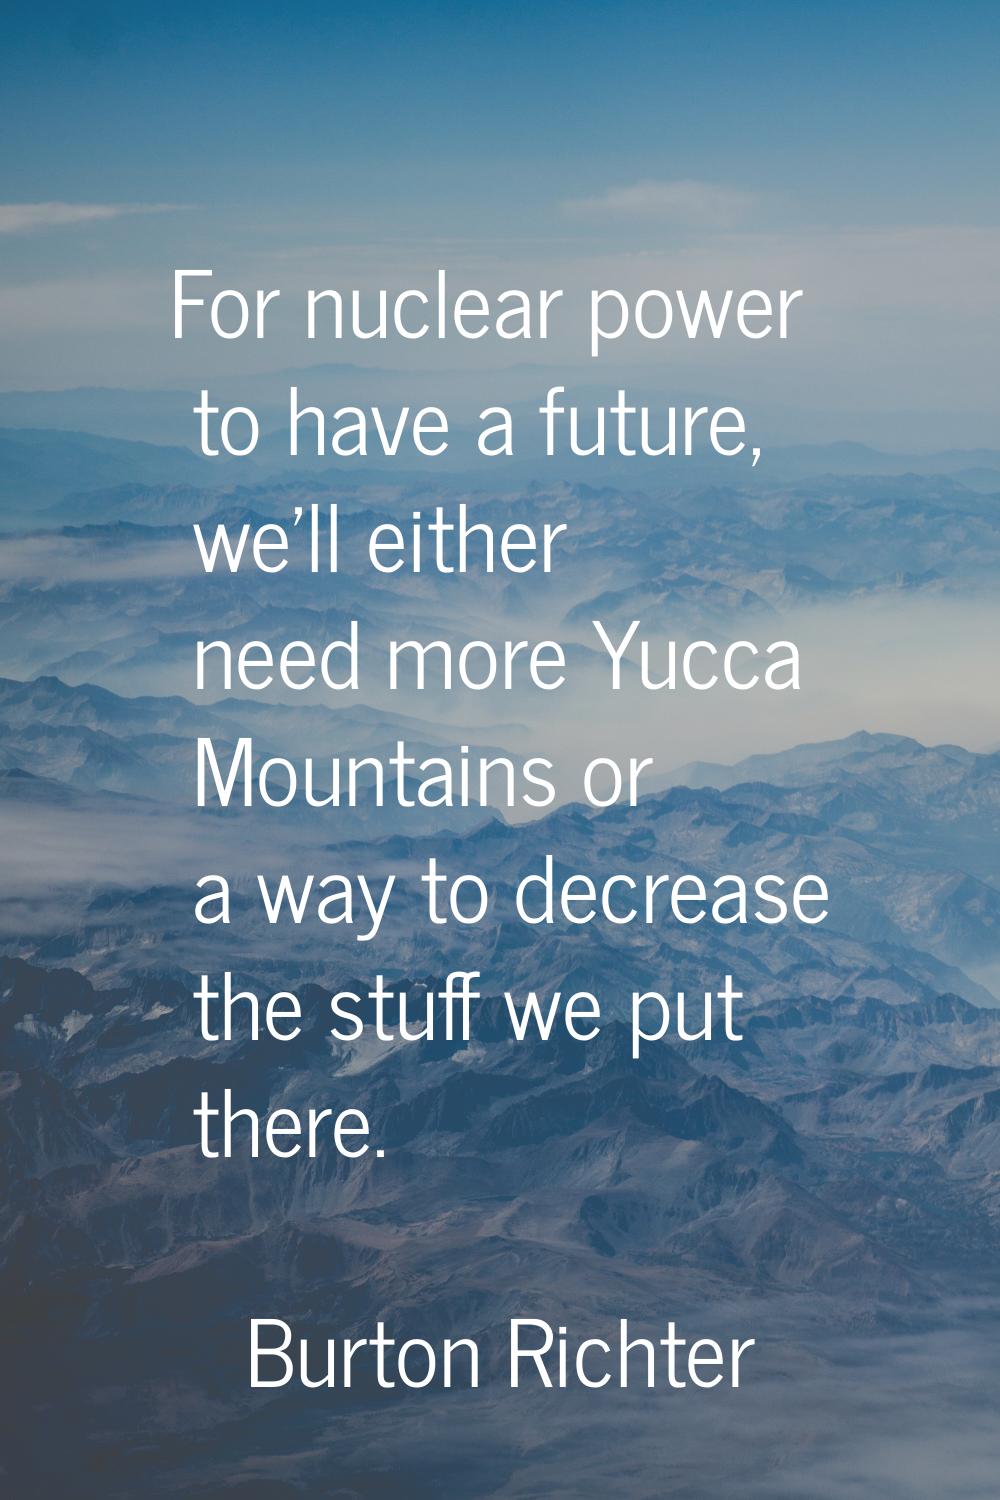 For nuclear power to have a future, we'll either need more Yucca Mountains or a way to decrease the